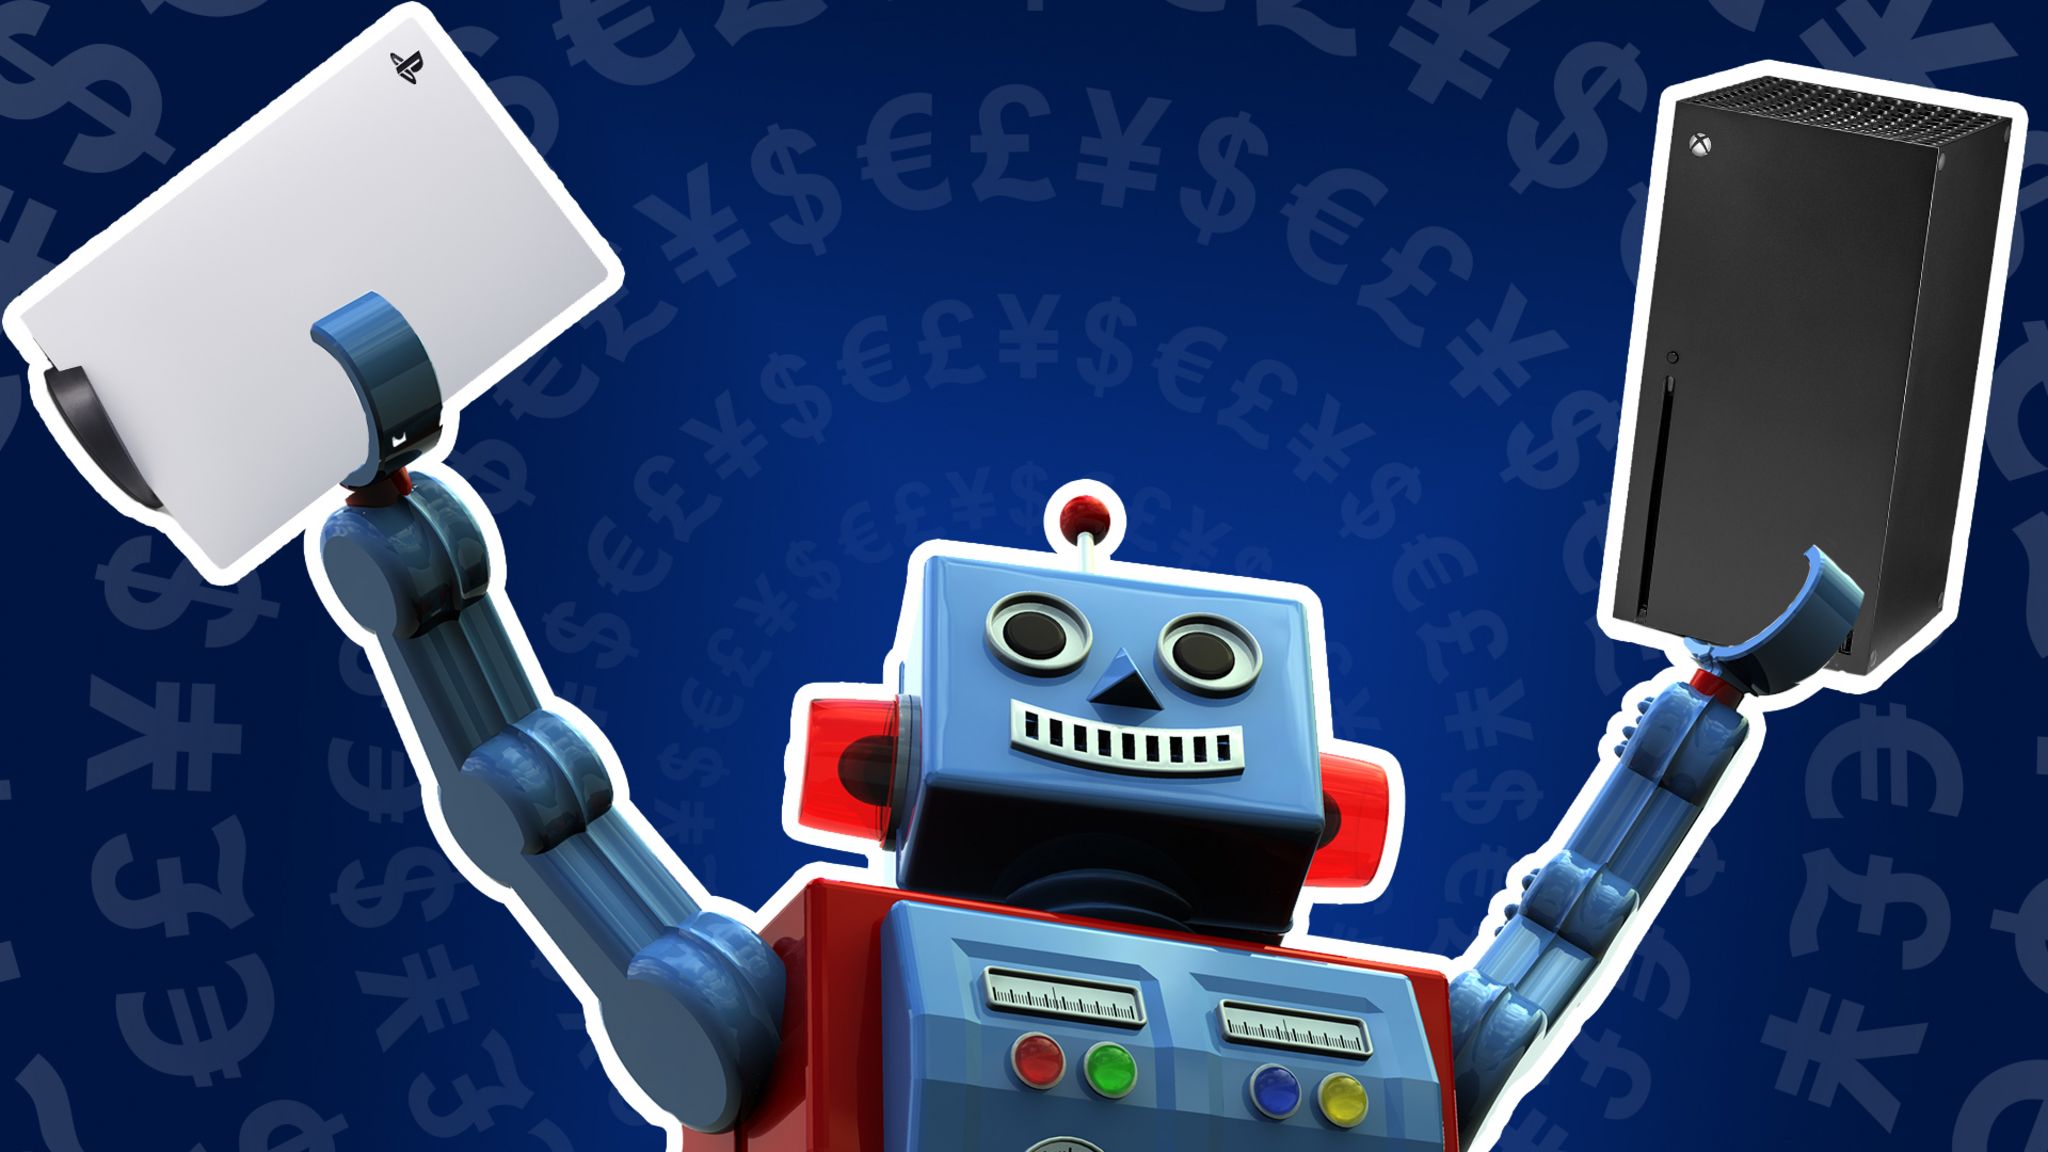 A photo illustration shows a toy robot waving a PlayStation 55 and Xbox Series X in the air, against a blue background littered with currency symbols radiating outwards in concentric symbols